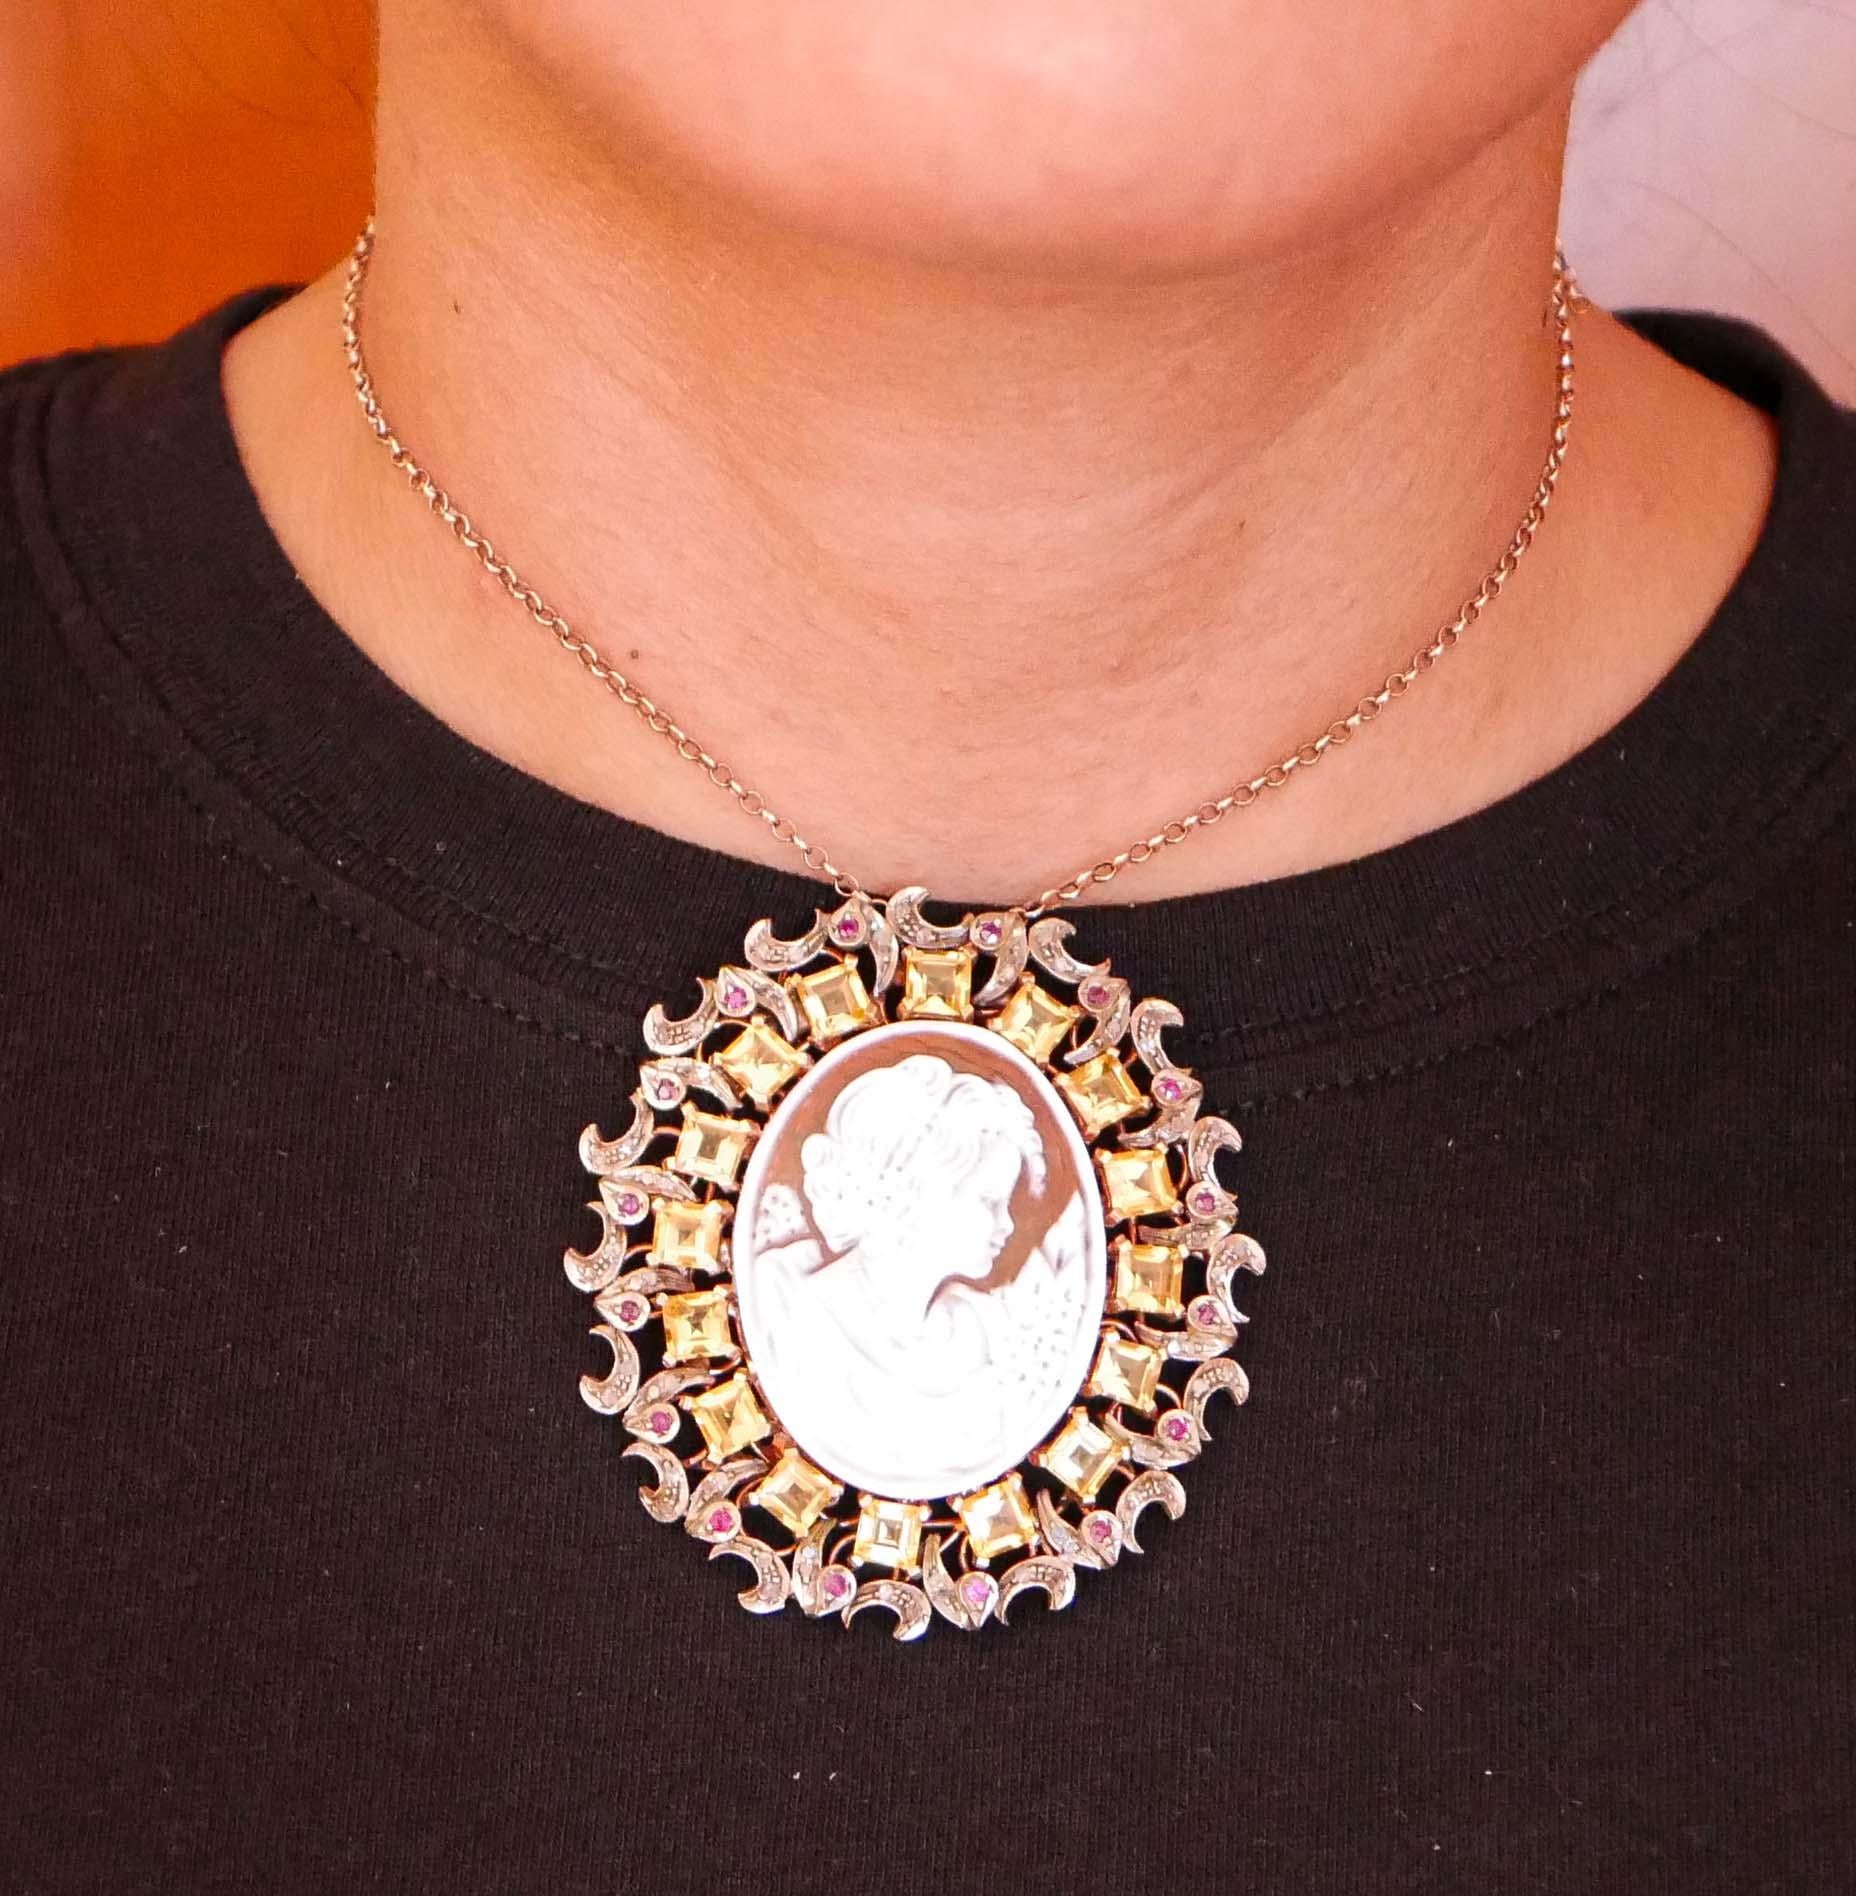 Women's Cameo, Topazs, Rubies, Diamonds, Rose Gold and Silver Brooch/Pendant. For Sale